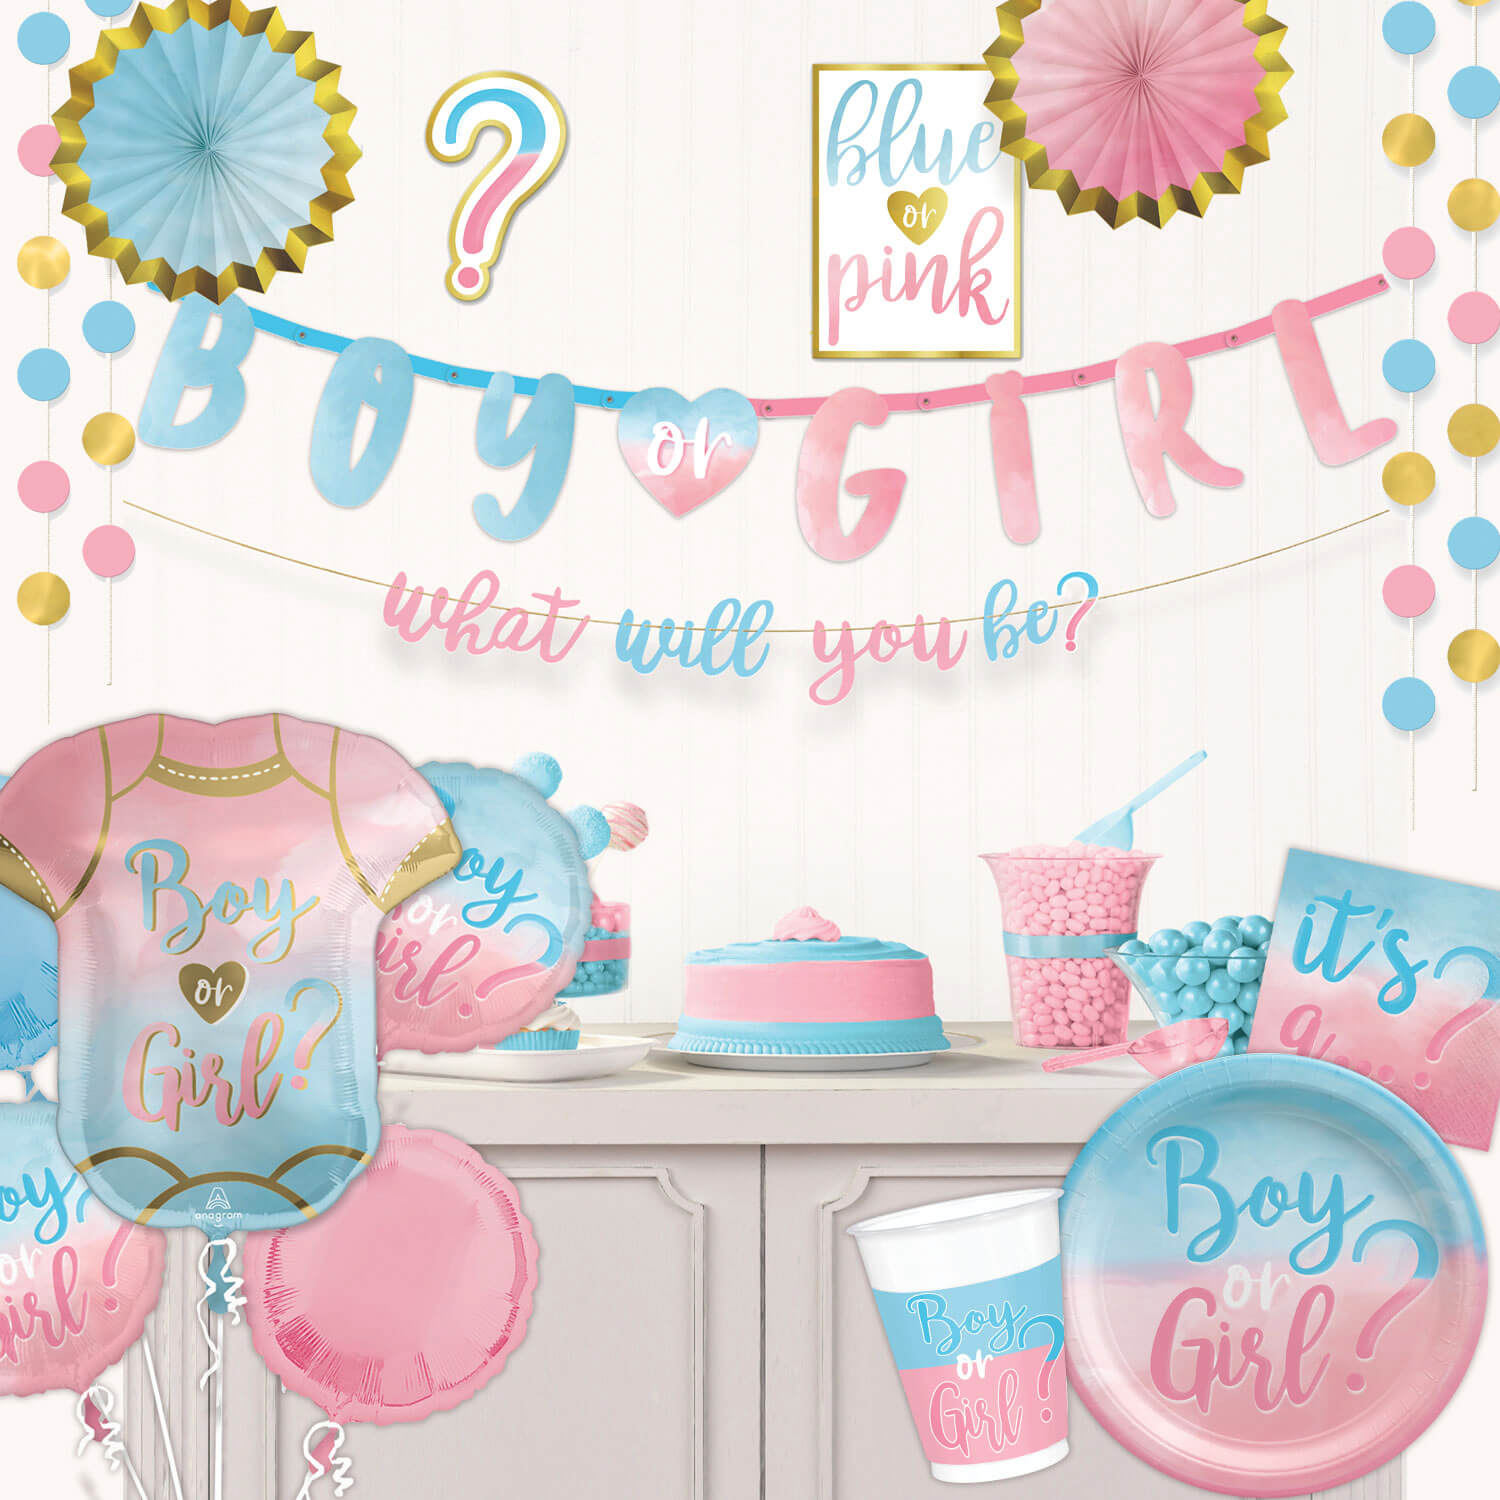 boy or girl blue and pink gender reveal party supplies